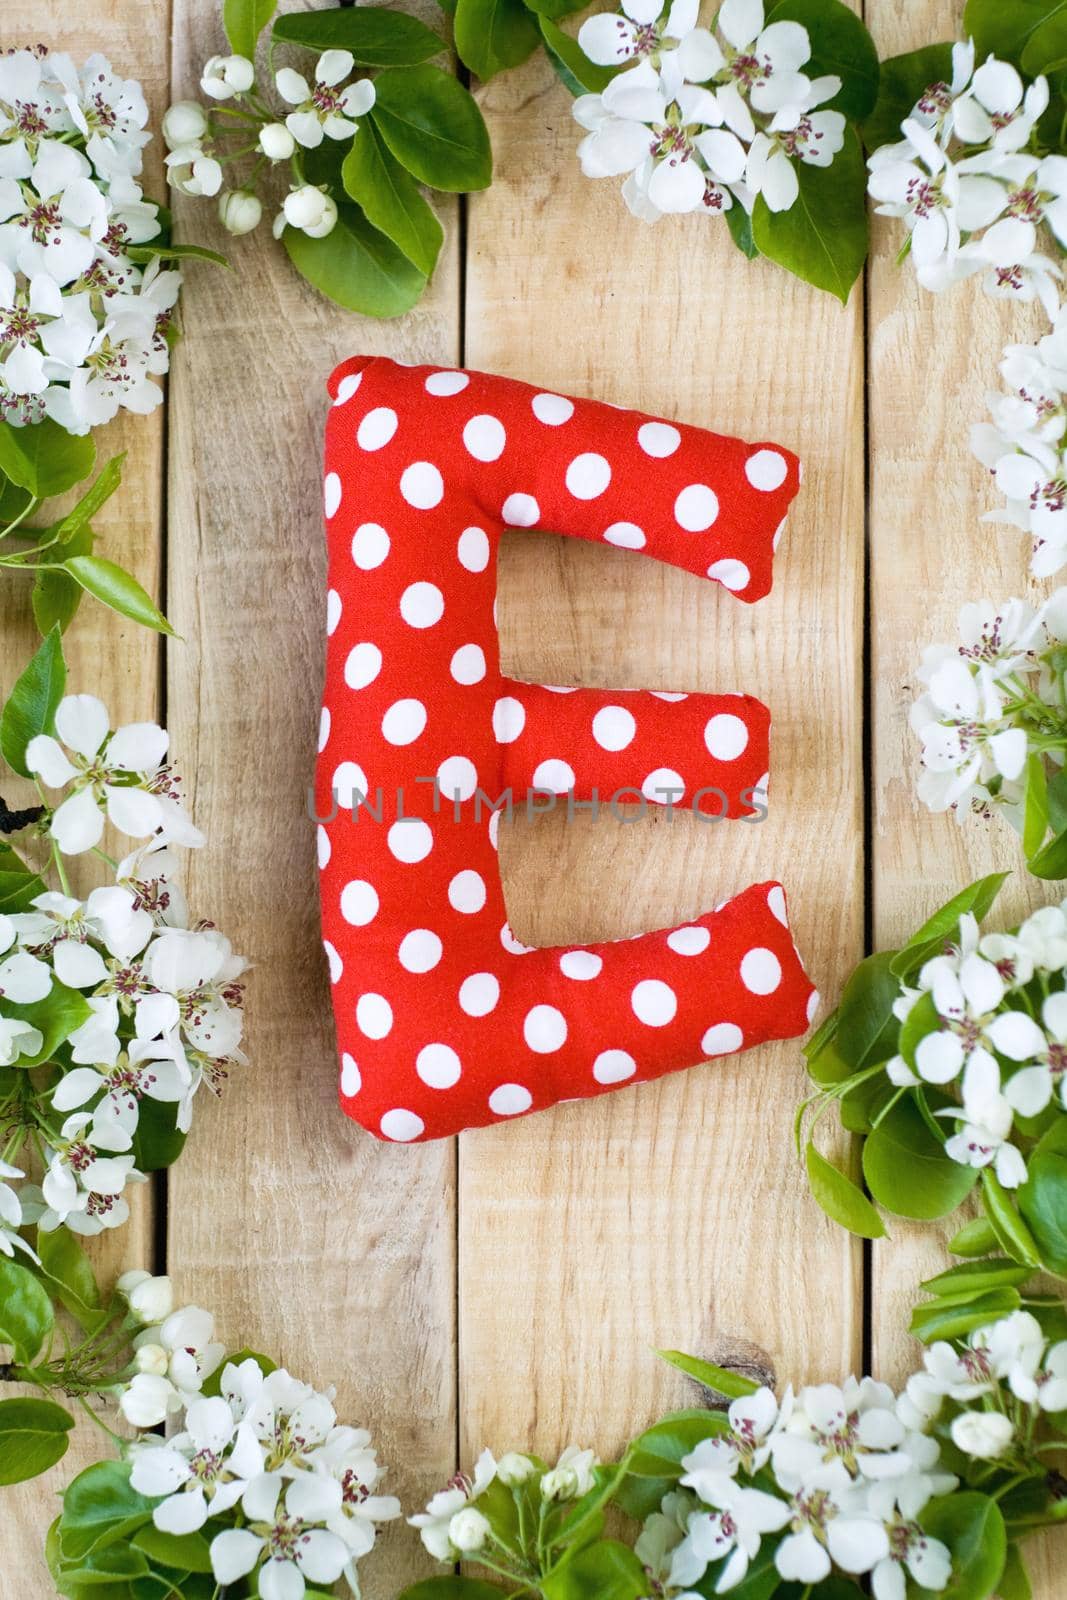 Natural wooden background with white flowers fruit tree. In the middle is the letter E, is made of red polka dot fabric.